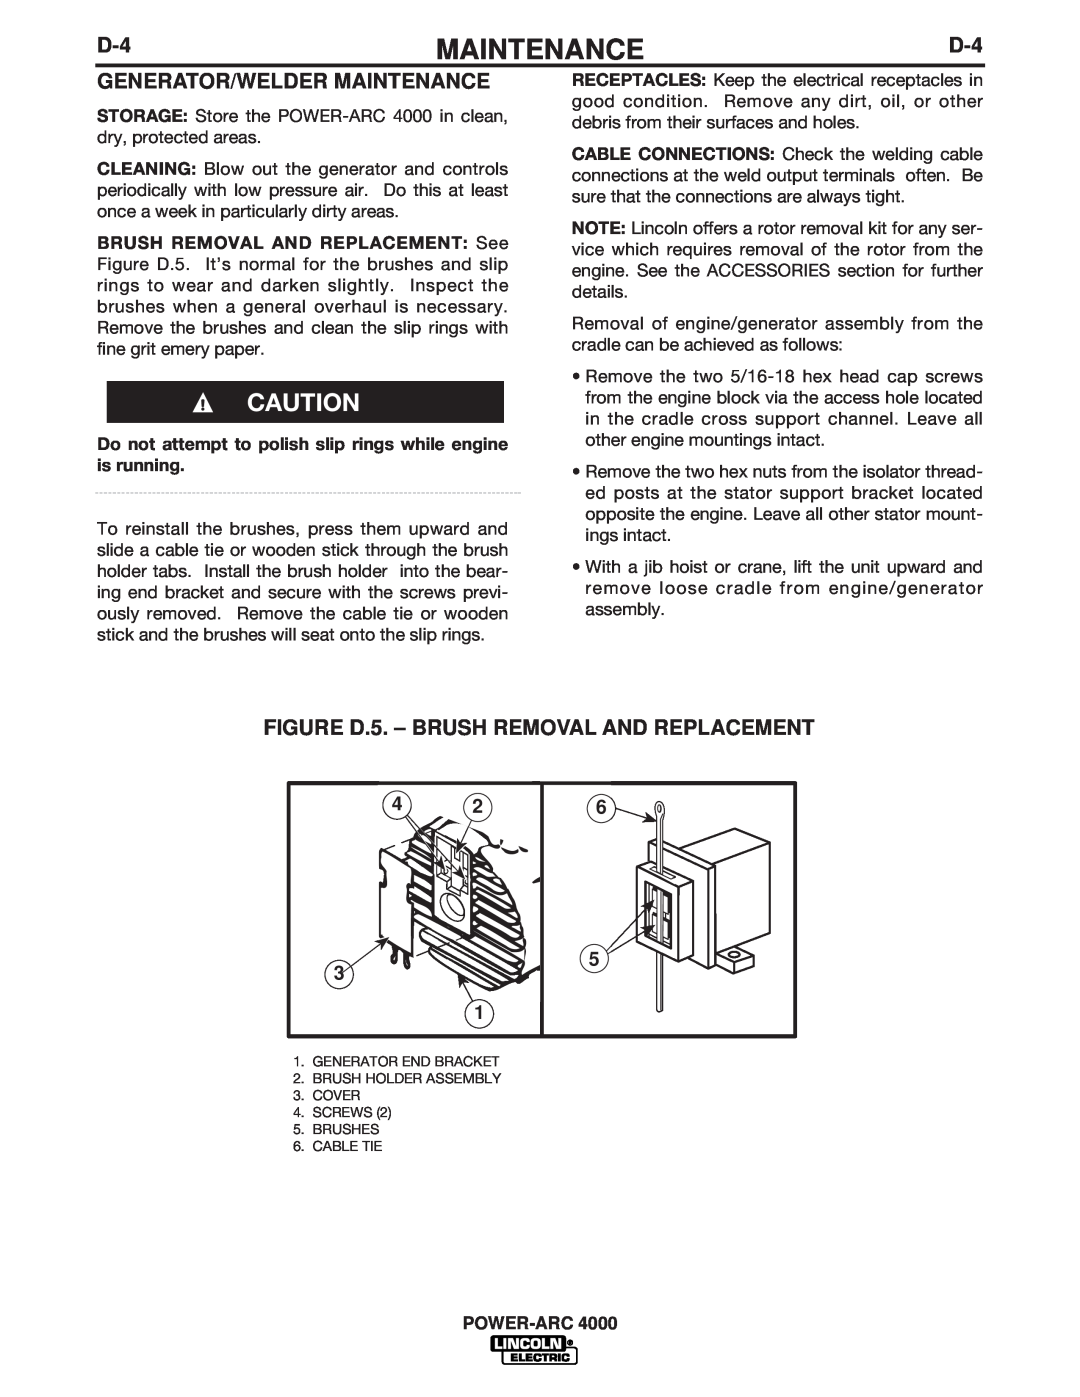 Lincoln Electric 4000 manual Generator/Welder Maintenance, FIGURE D.5. - BRUSH REMOVAL AND REPLACEMENT, Power-Arc 